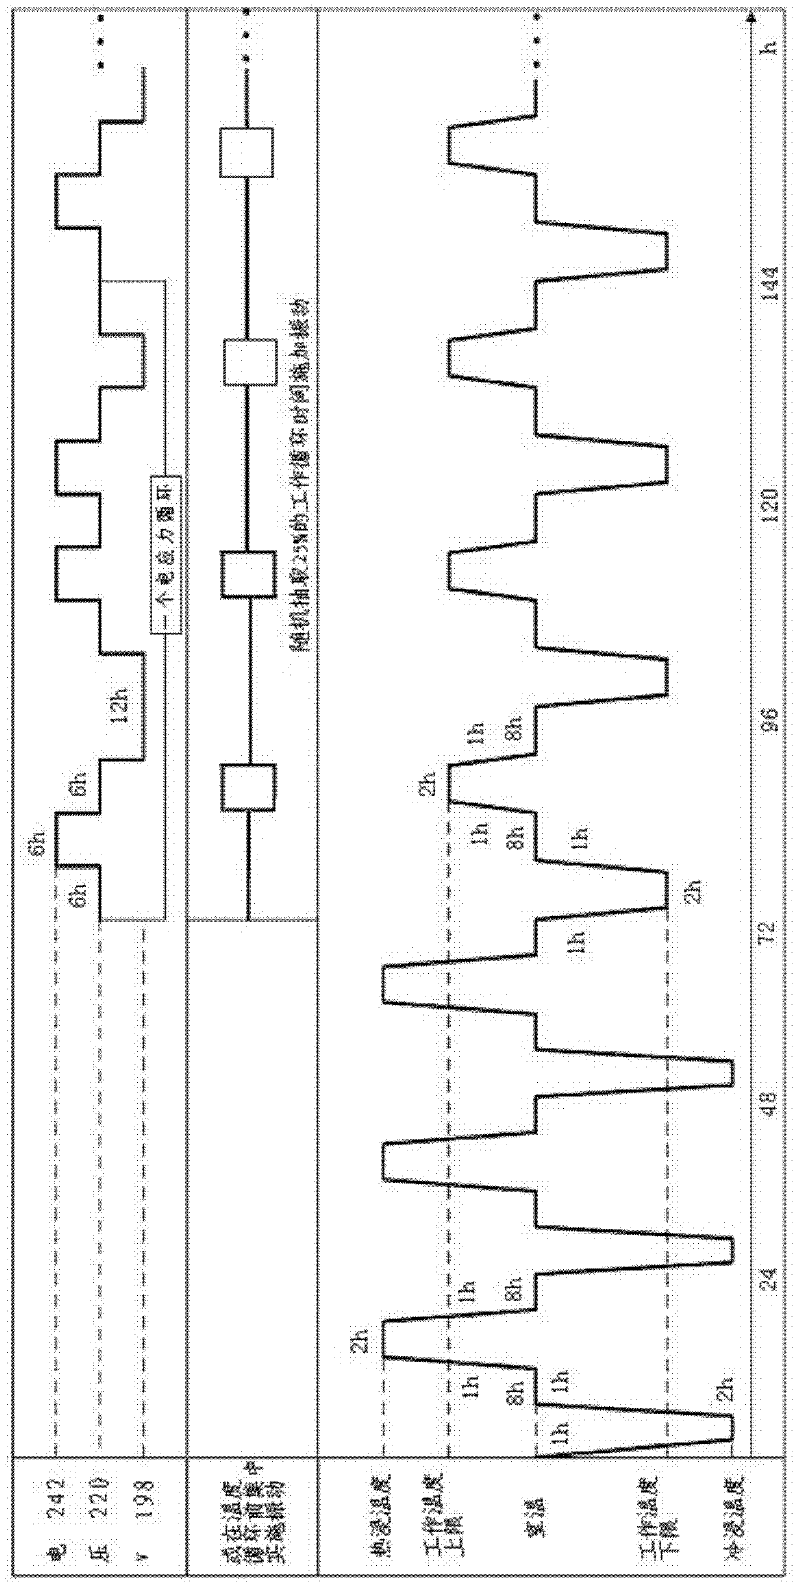 High-efficiency MTBF (Mean Time Between Failures) proof test method applied to ship navigation product